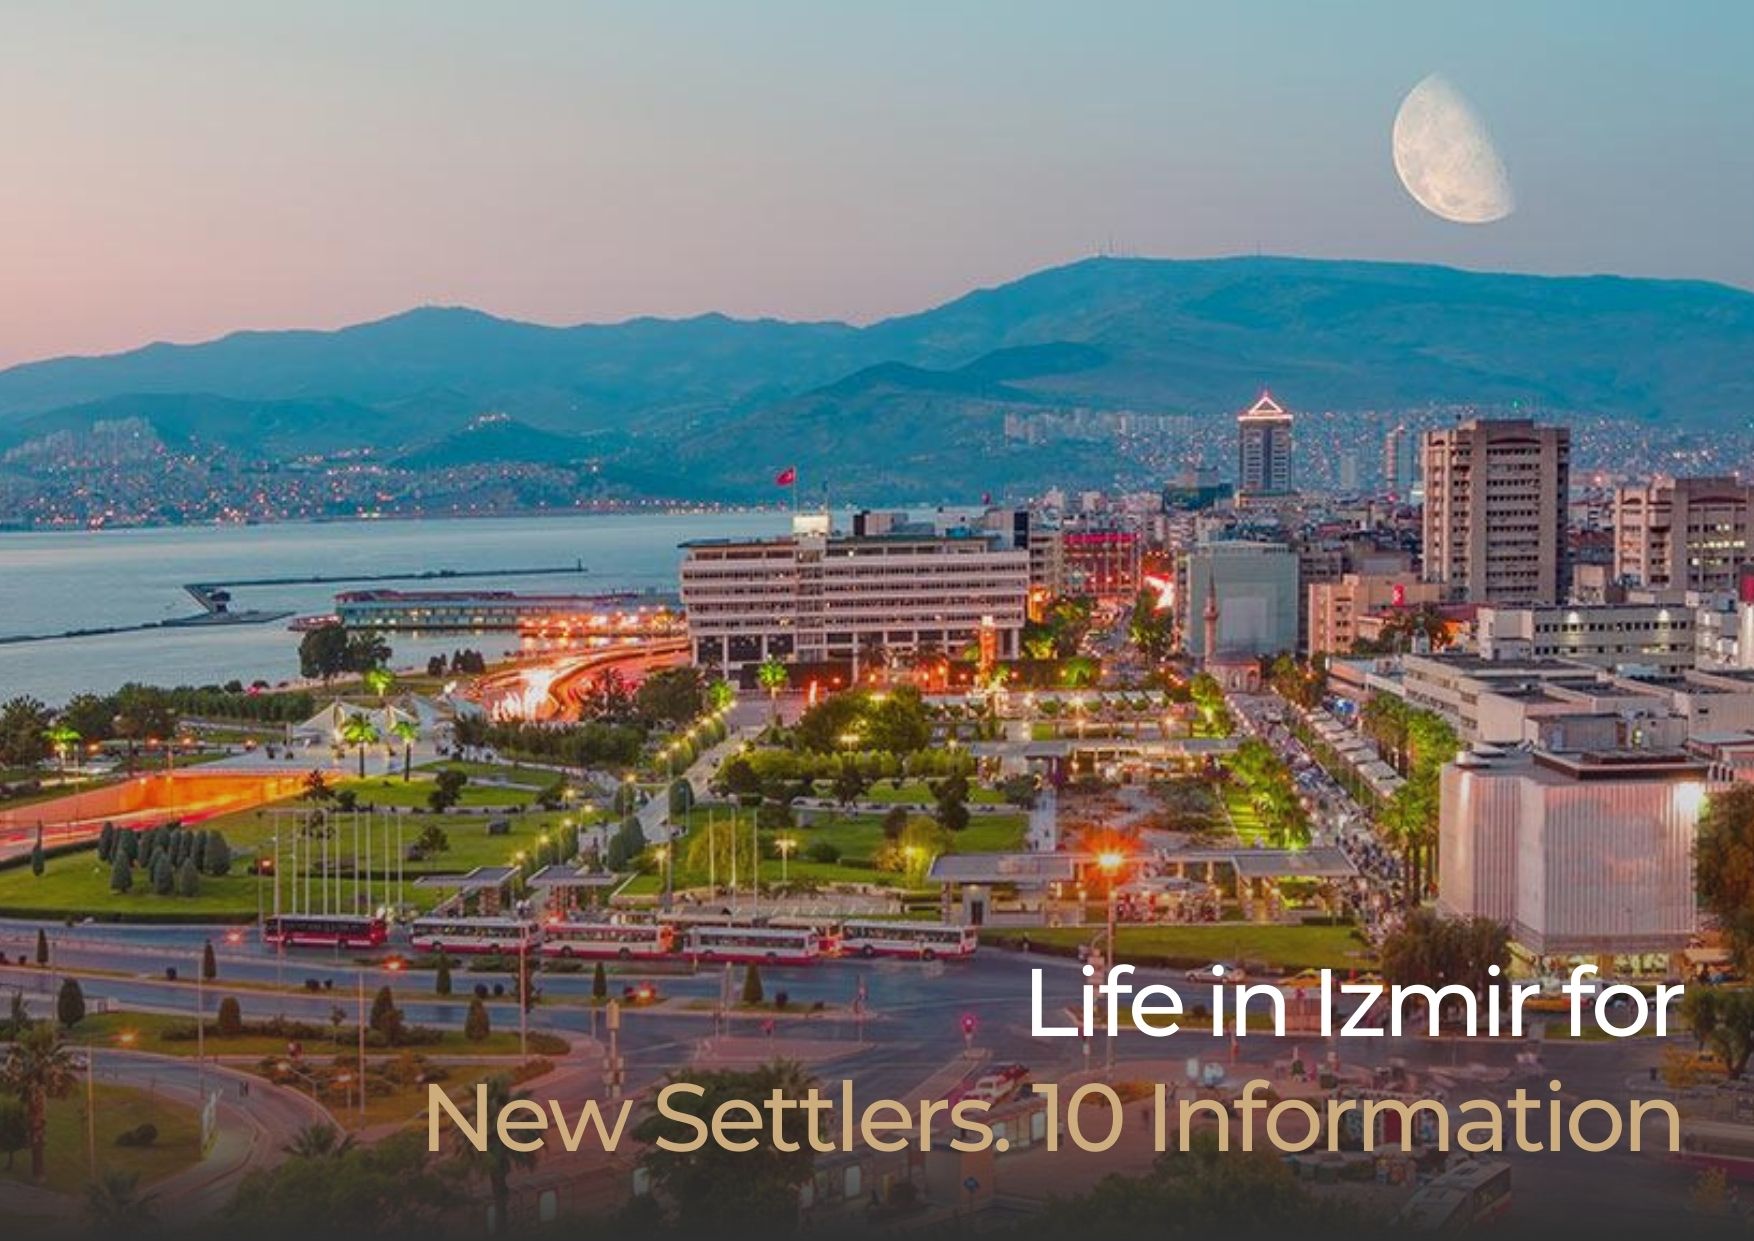 /wp-content/uploads/2023/05/life-in-izmi-fo-new-settlers-10-information.jpg